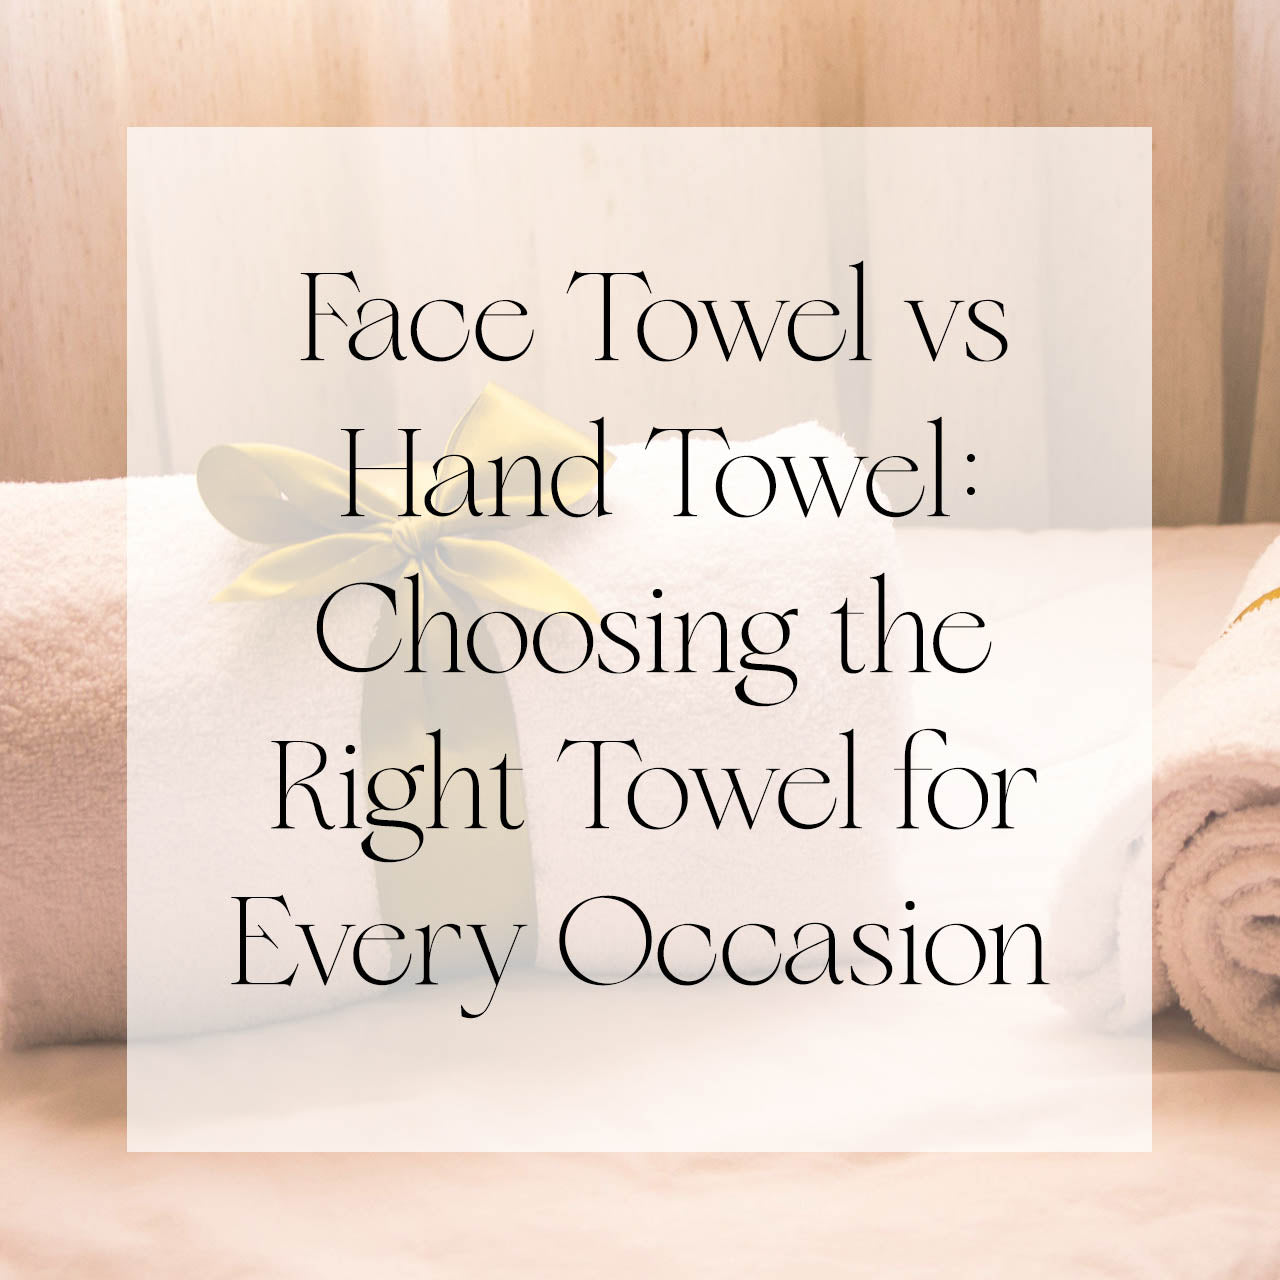 Face Towel vs Hand Towel: Choosing the Right Towel for Every Occasion